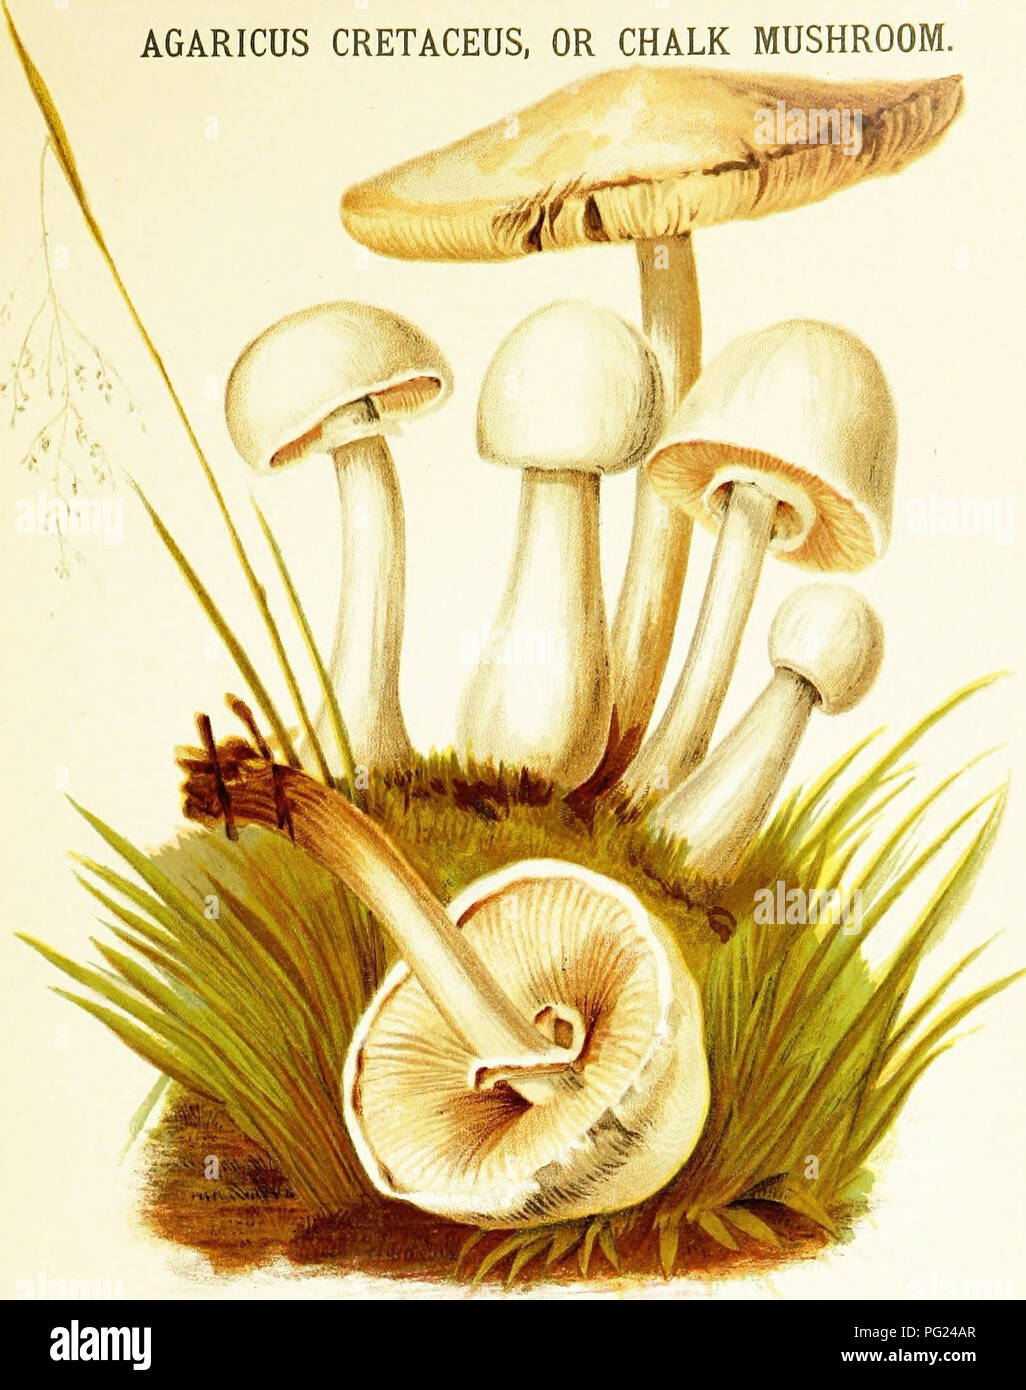 Mushrooms of America, edible and poisonous. Mushrooms; Cookery (Mushrooms);  cbk. AGARICUS CRETACEUS, OR CHALK MUSHROOM.. PLATE IV. Q^SQPIPXION. PiLEDS.  Pure white, dry at first, nearly globular, then bell-shaped, finally  expanded and